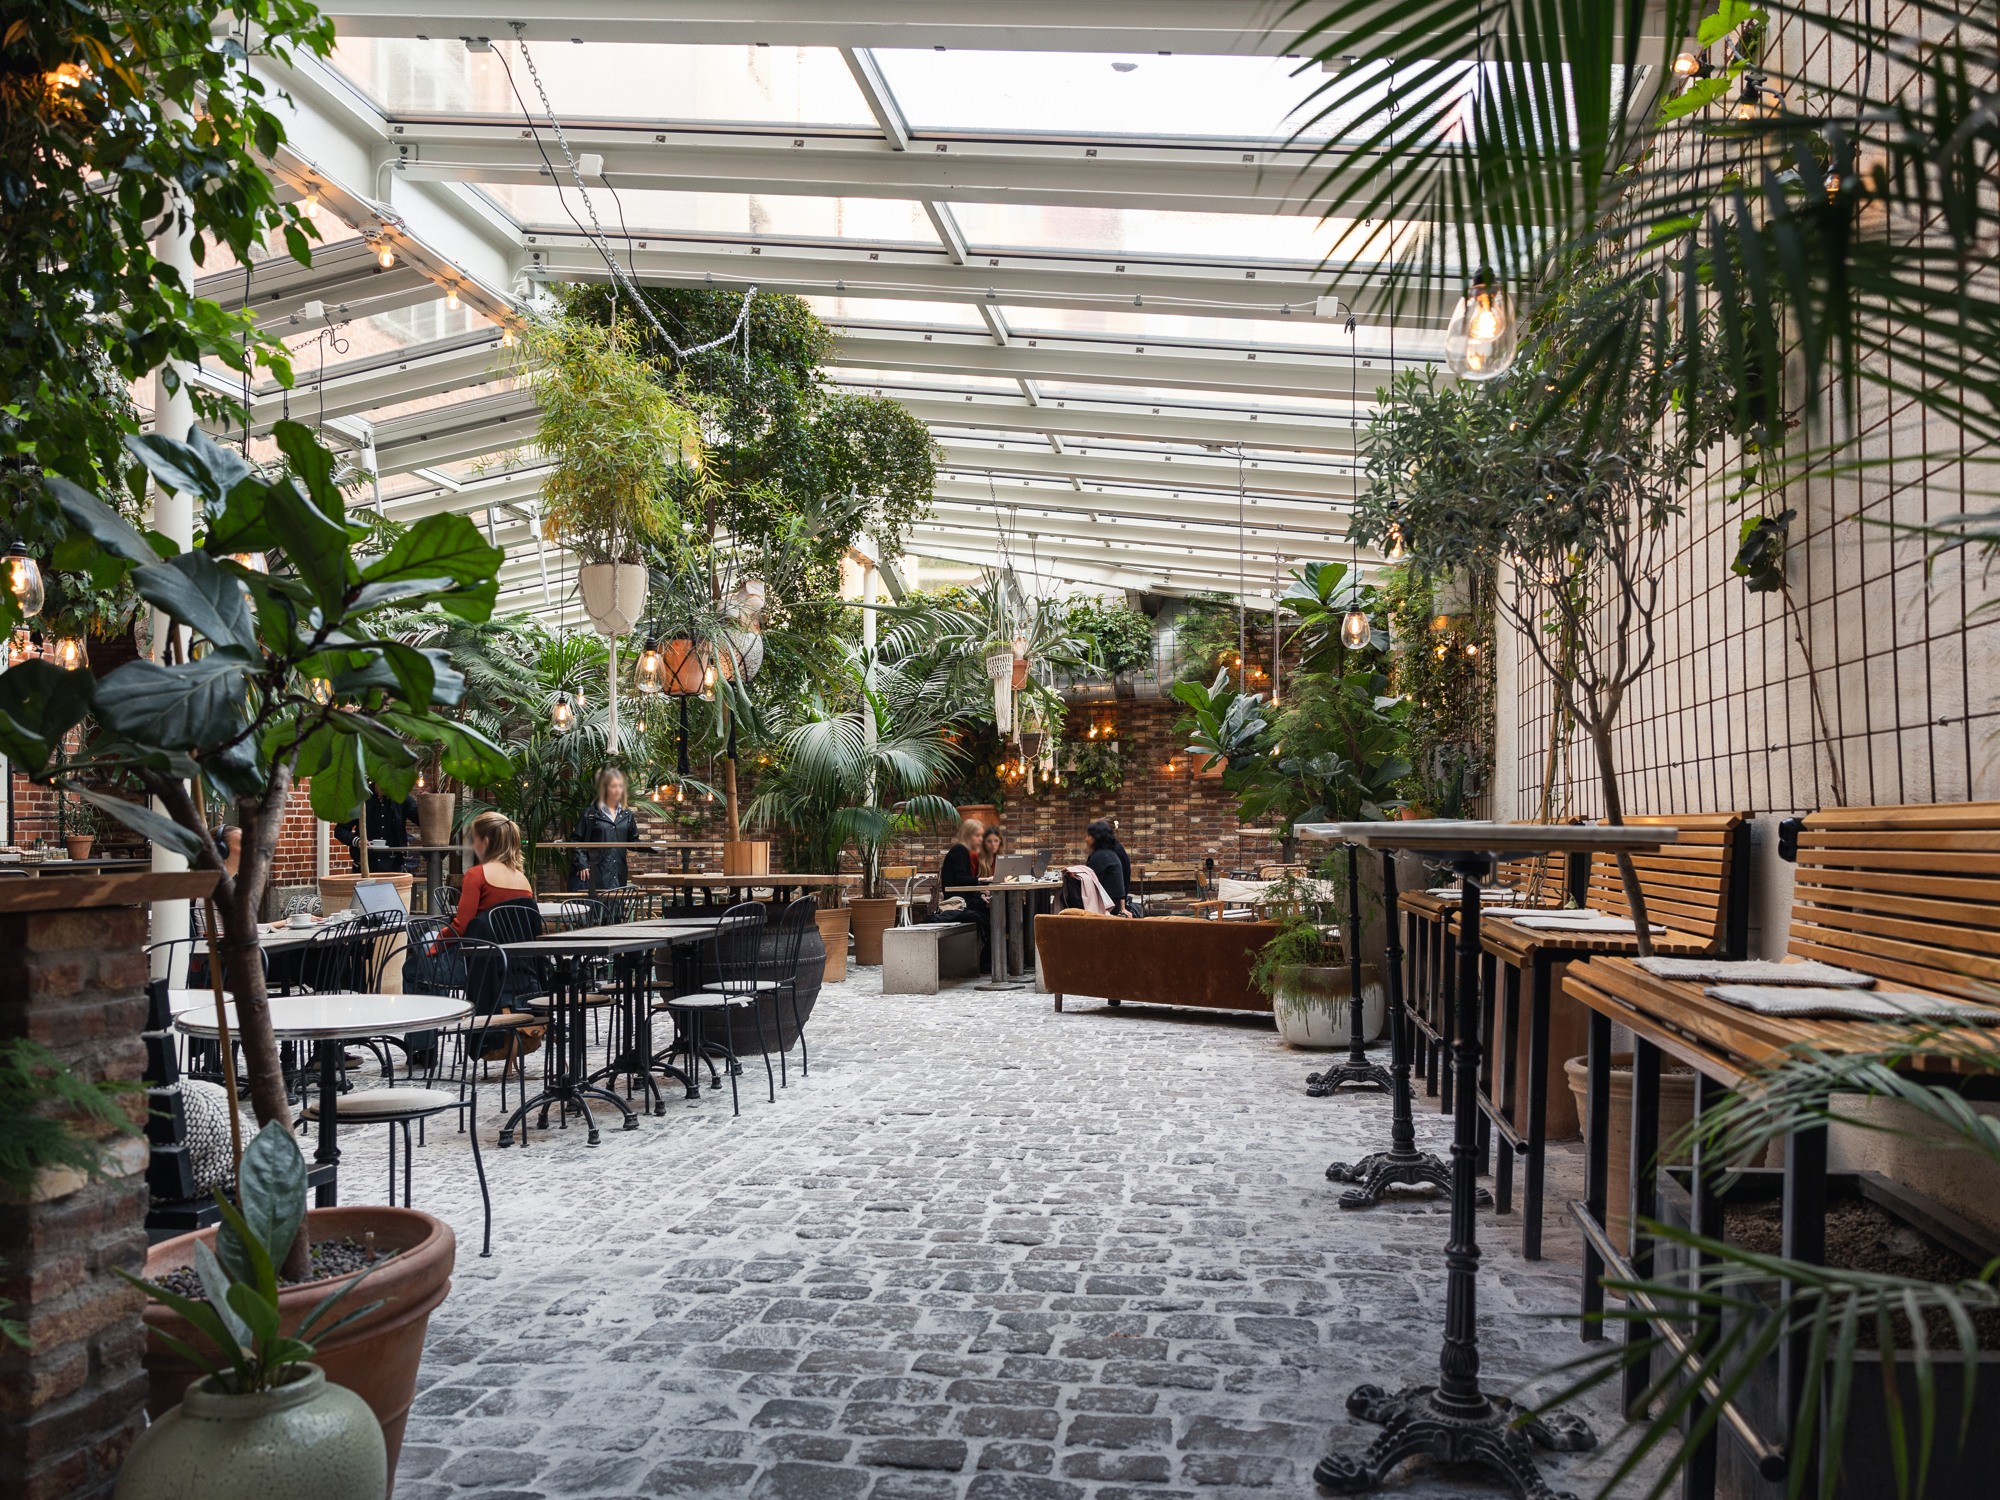 Café with glass ceiling and plants hanging.